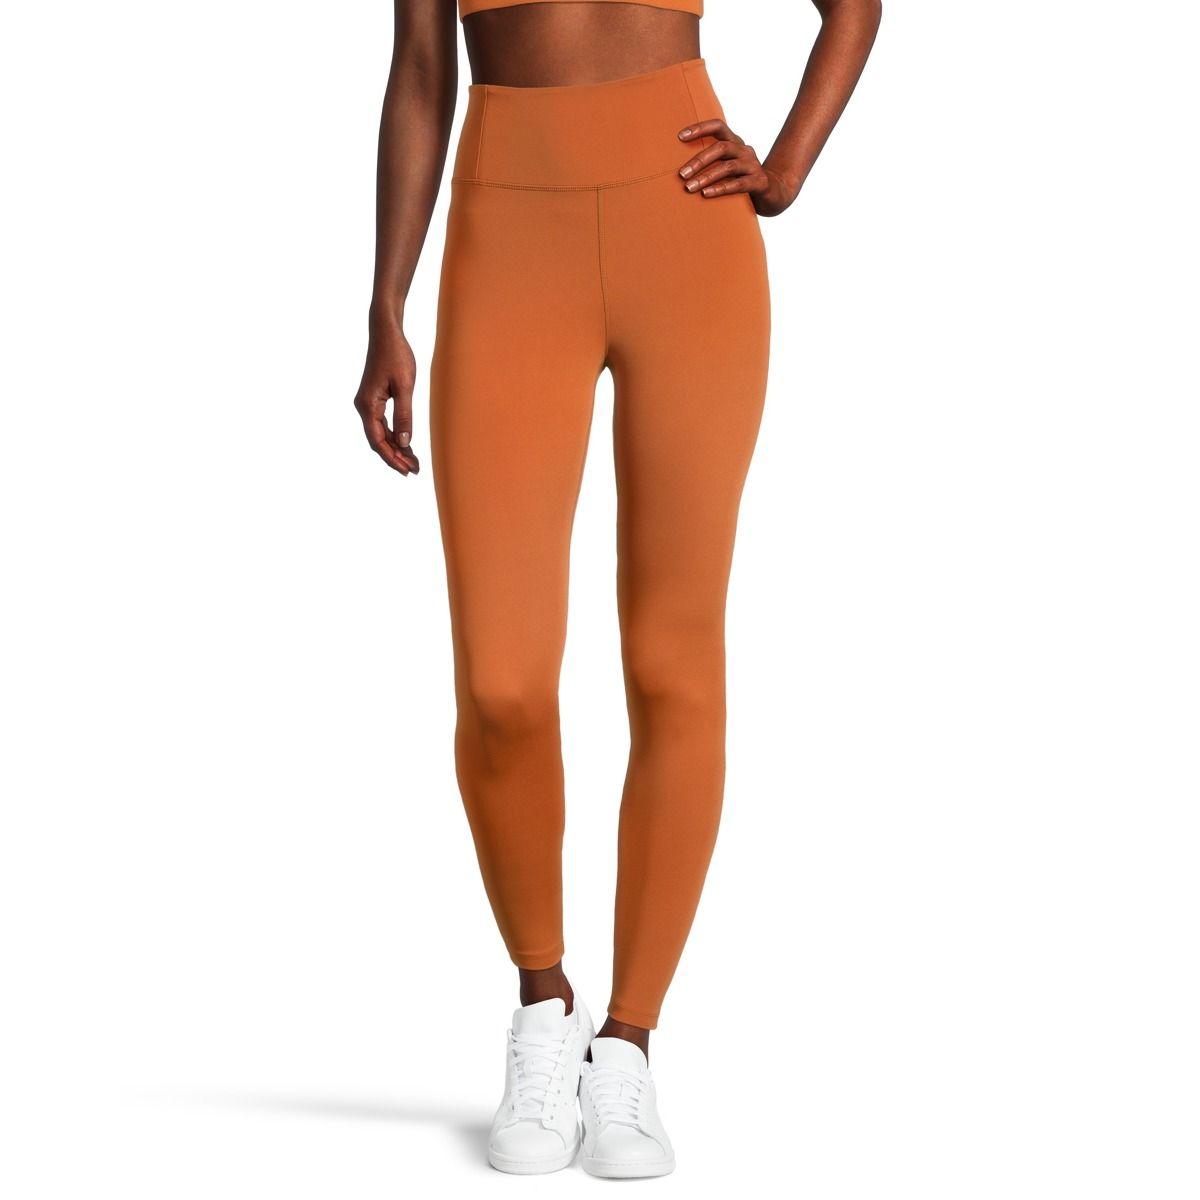 Girlfriend Collective + Biome FLOAT High-Rise Legging